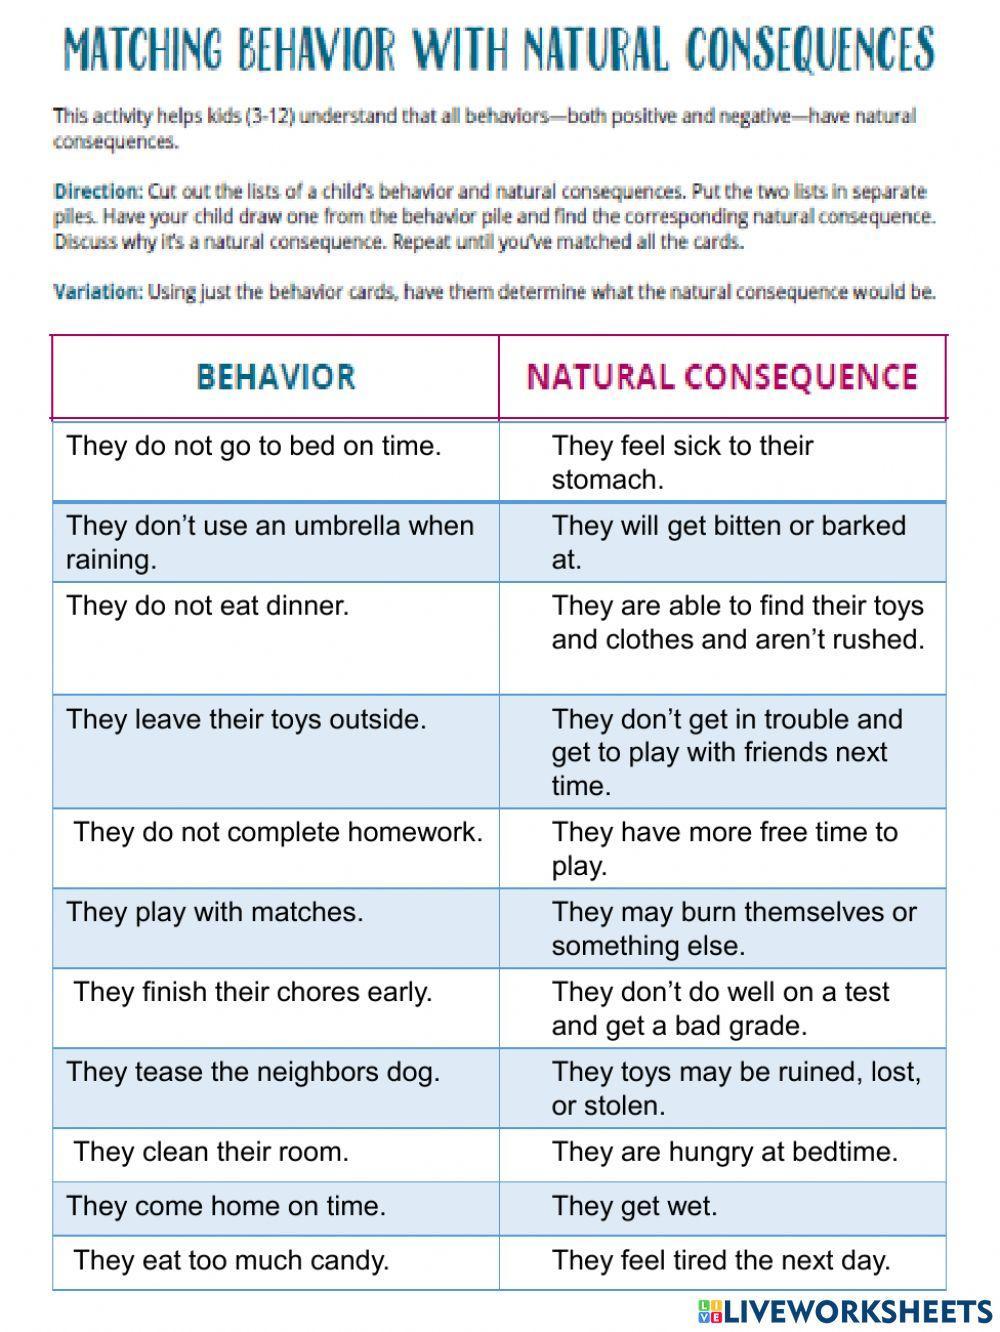 Matching behavior with natural consequences